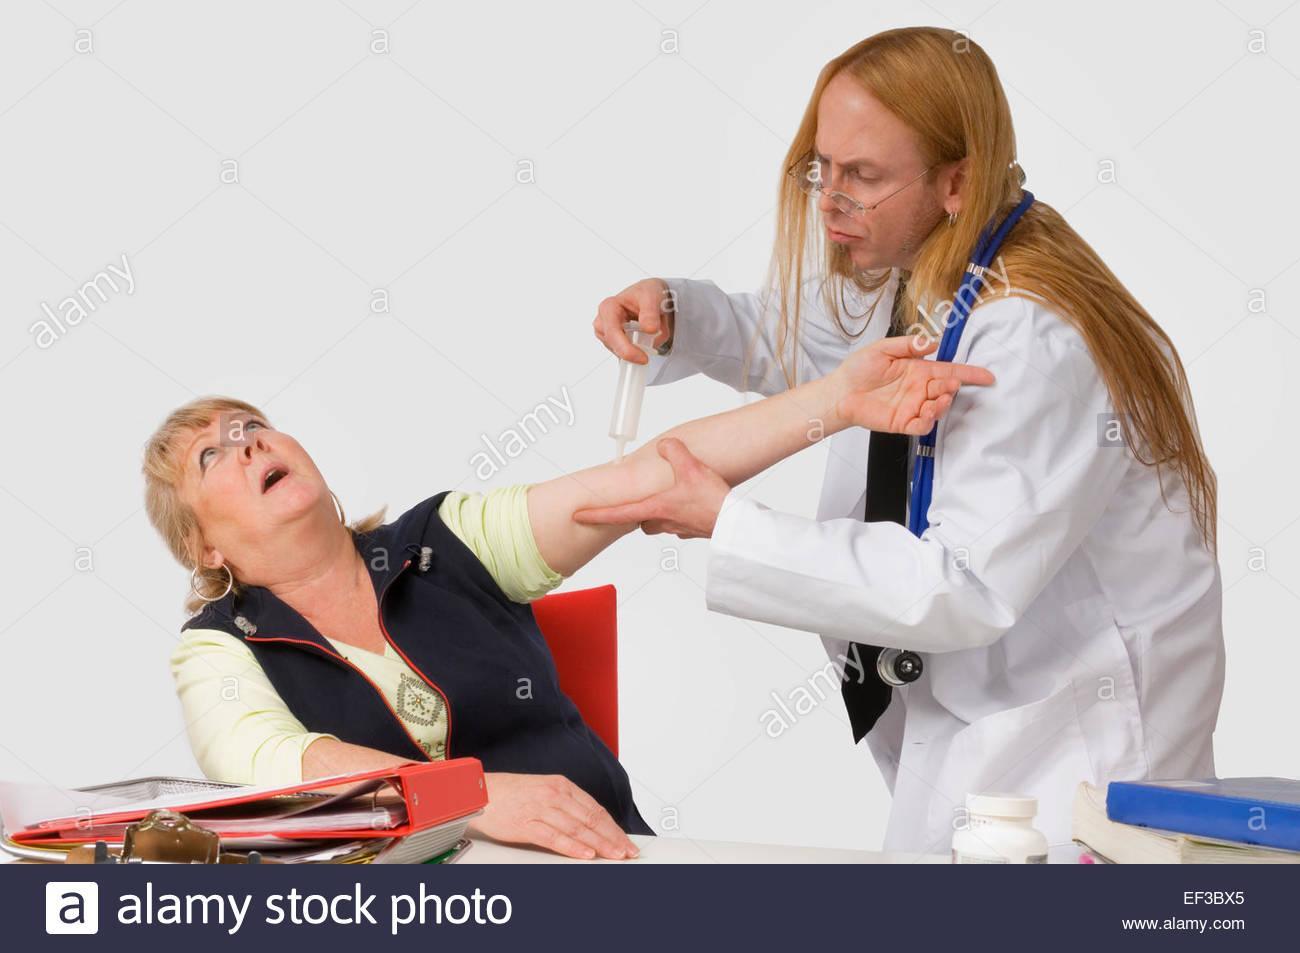 Image of a funny doctor giving a shot. 